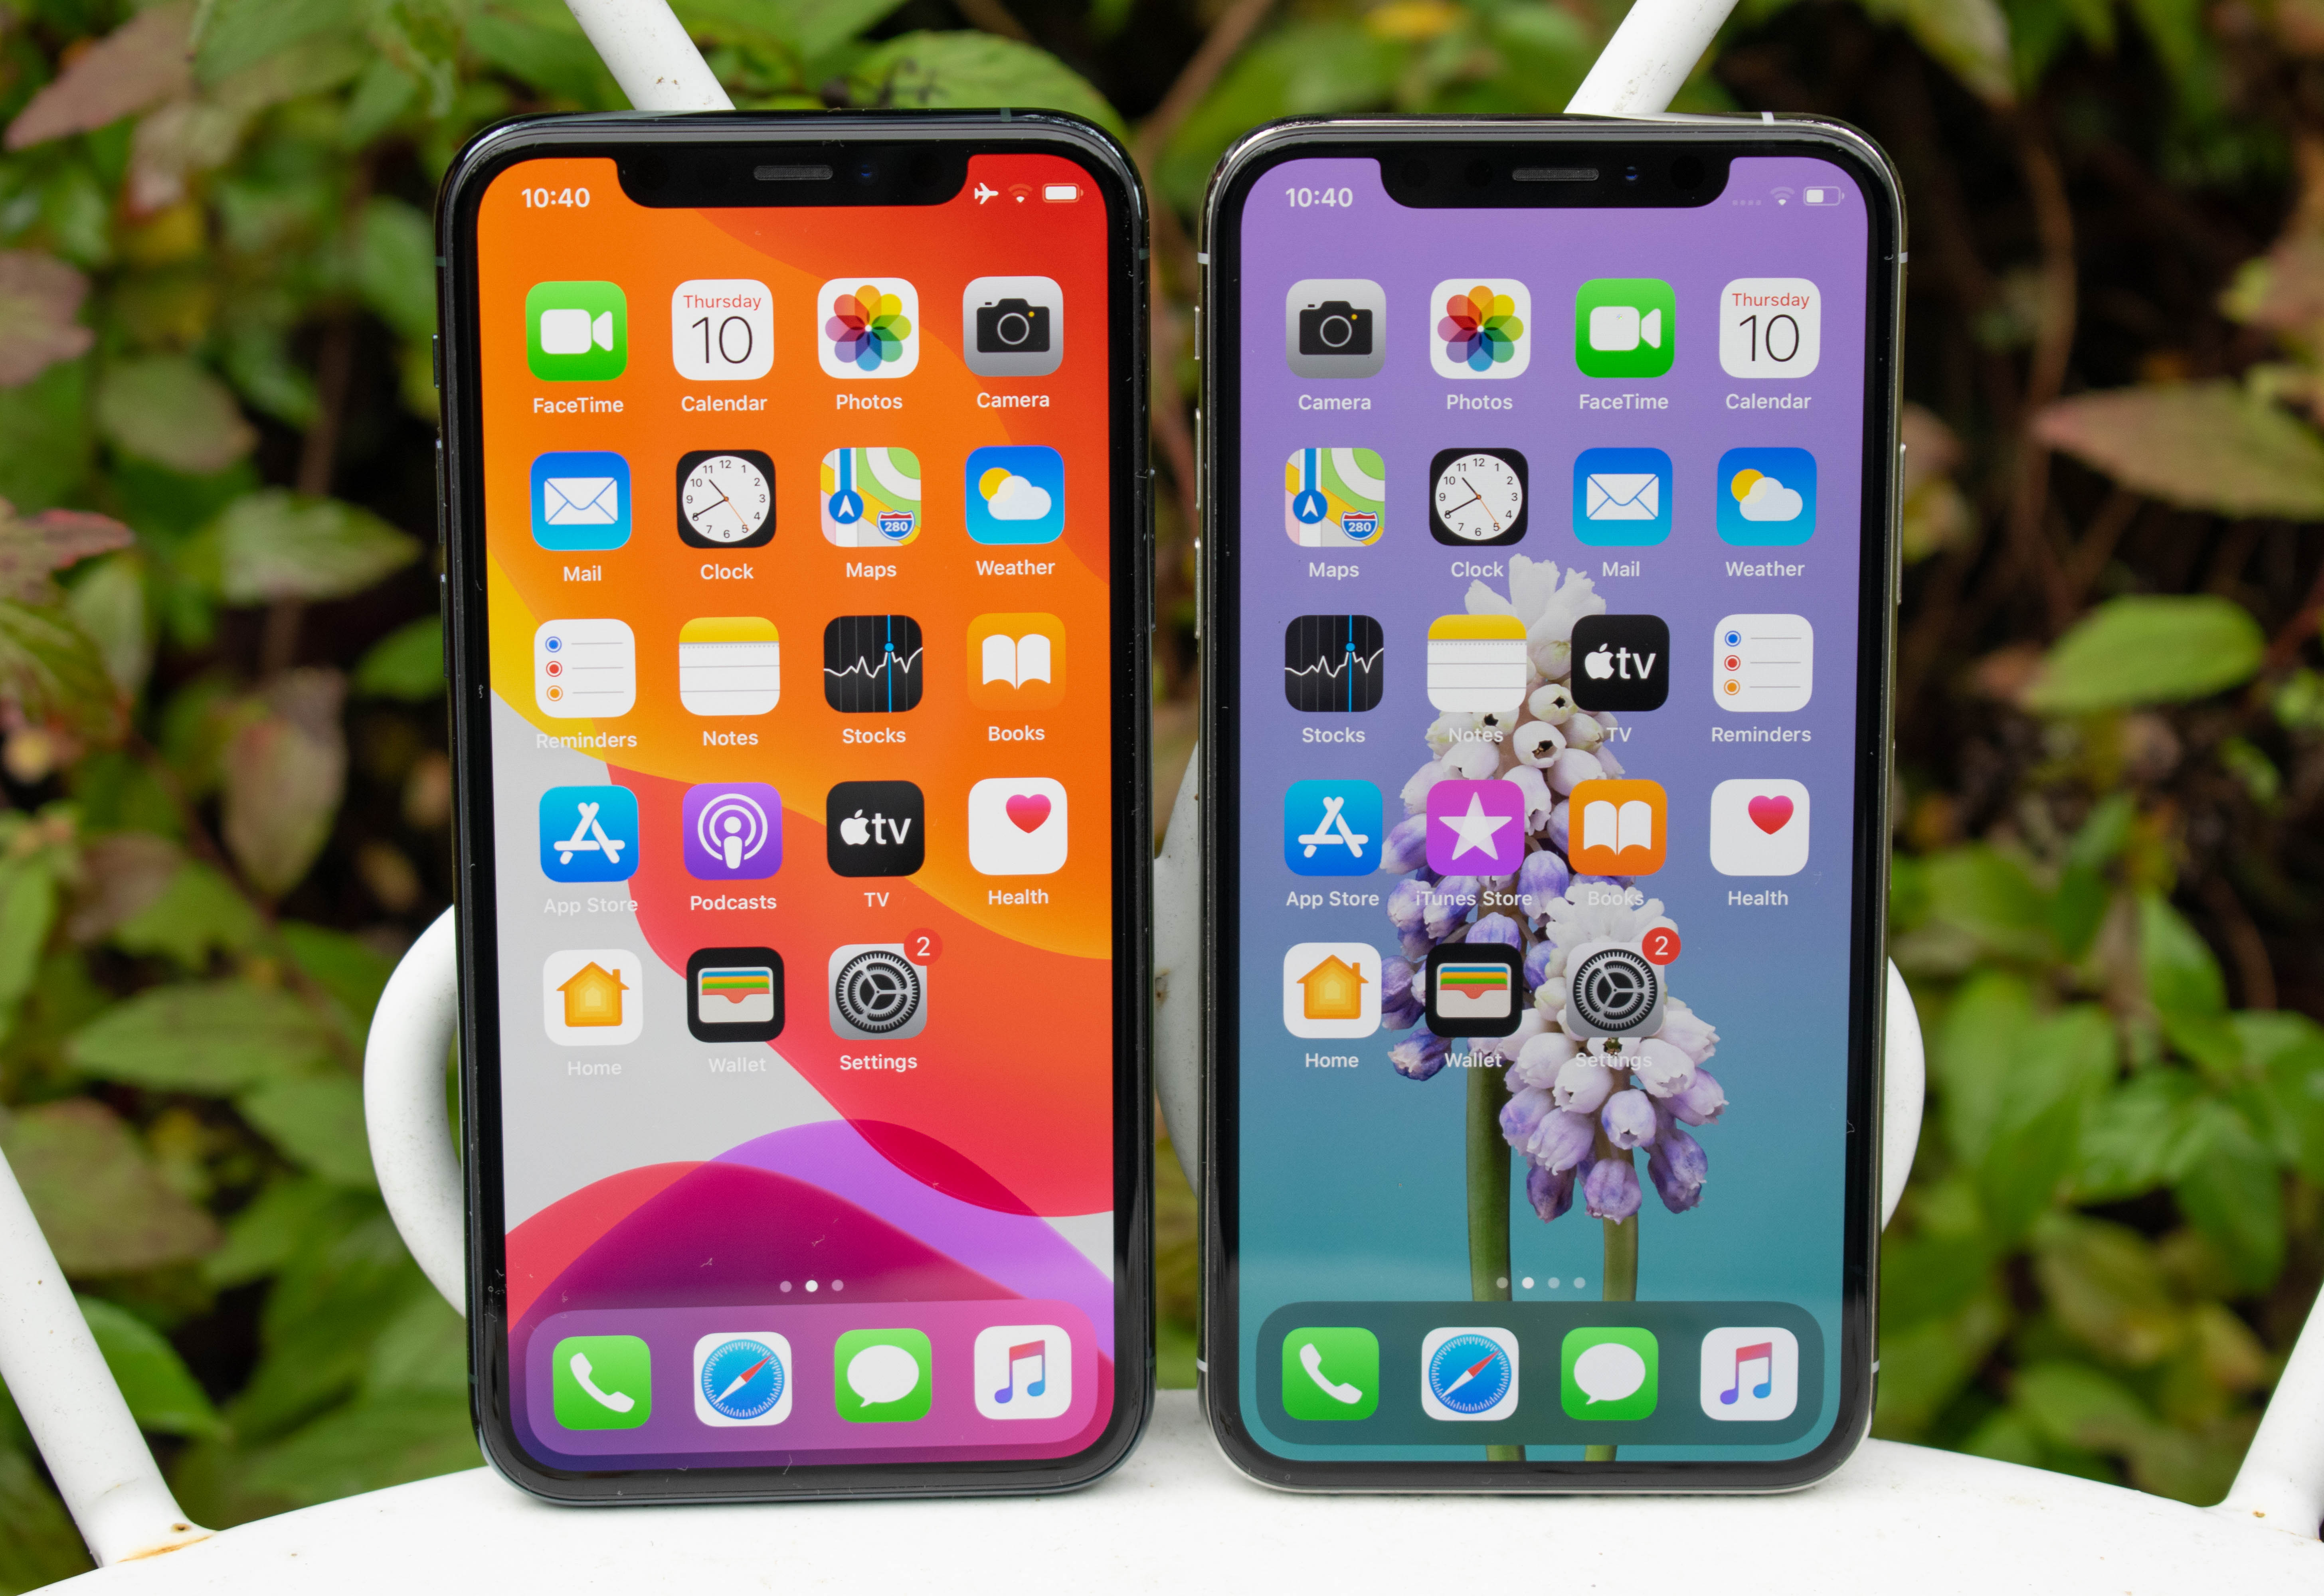 Apple iPhone 11 Pro and Pro Max review: great battery life, screen